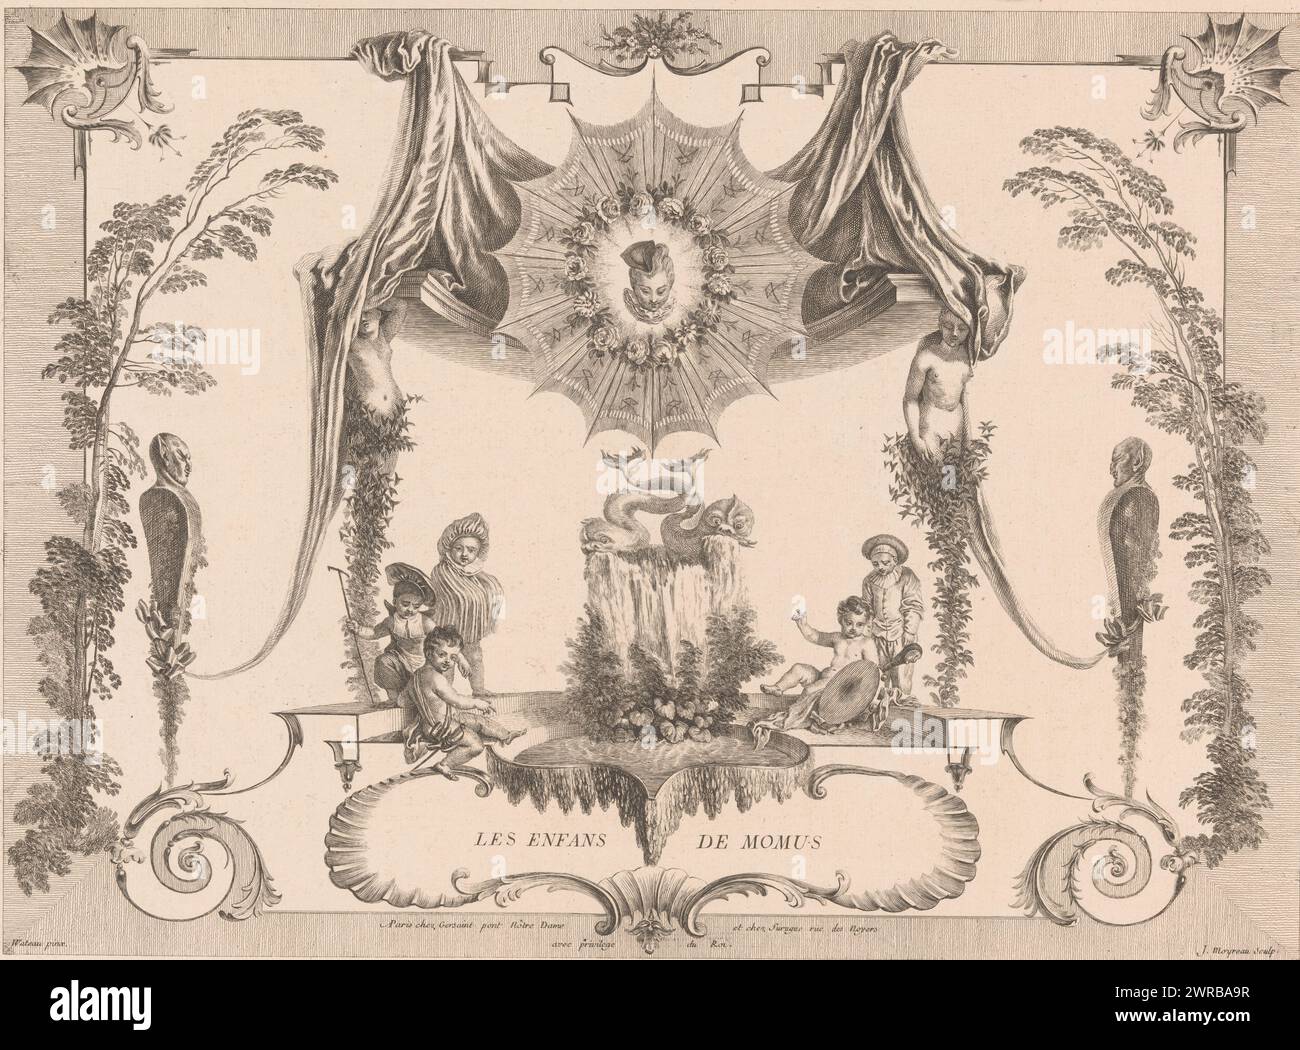 Design for paneling with children at a fountain, Les Enfans de Momus (title on object), Oeuvre of Antoine Watteau (series title), L'oeuvre d'Antoine Watteau, peintre du roy en son Academie roïale de peinture et sculpture (.. .) (series title), Numbered bottom right: 2., print maker: Jean Moyreau, after painting by: Jean Antoine Watteau, publisher: Edme François Gersaint, publisher: Paris, publisher: Paris, France, 1726 - 1735, paper, etching, engraving, height 371 mm × width 503 mm, print Stock Photo